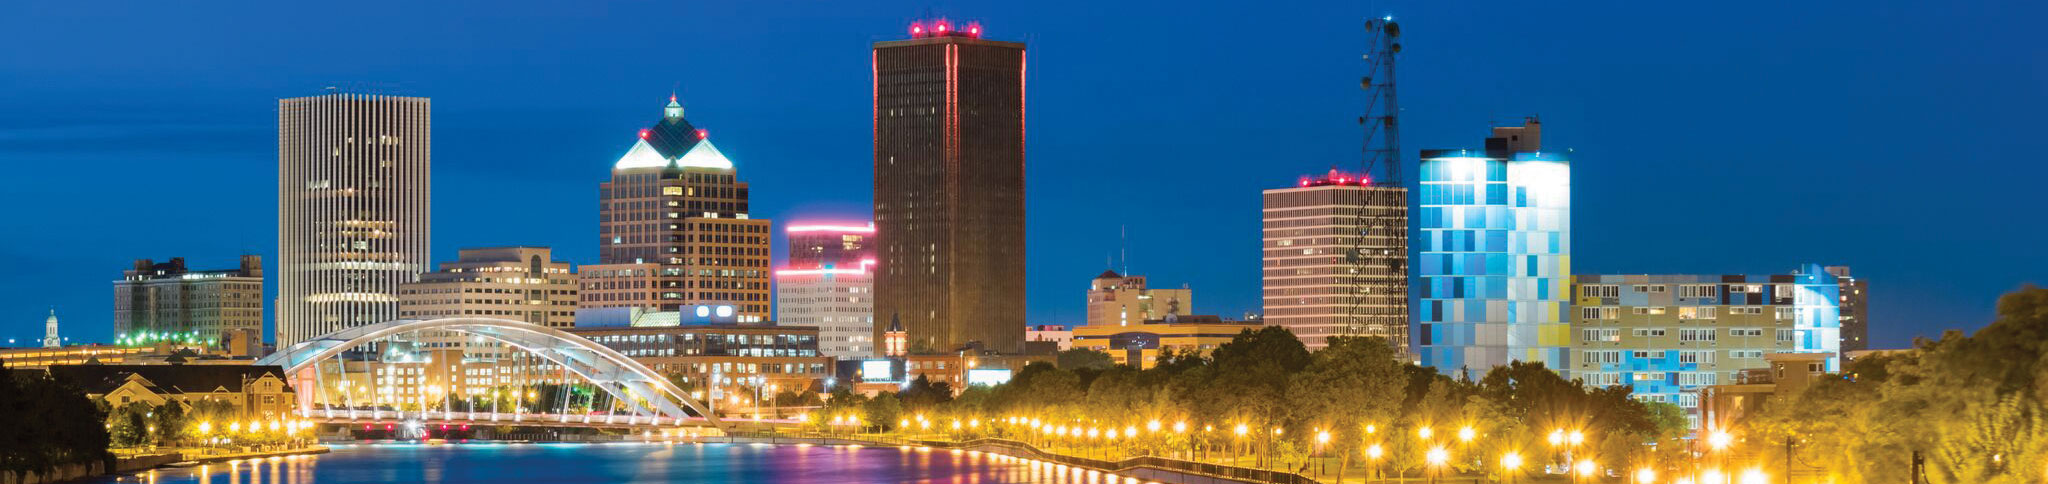 view of Rochester, NY's city skyline